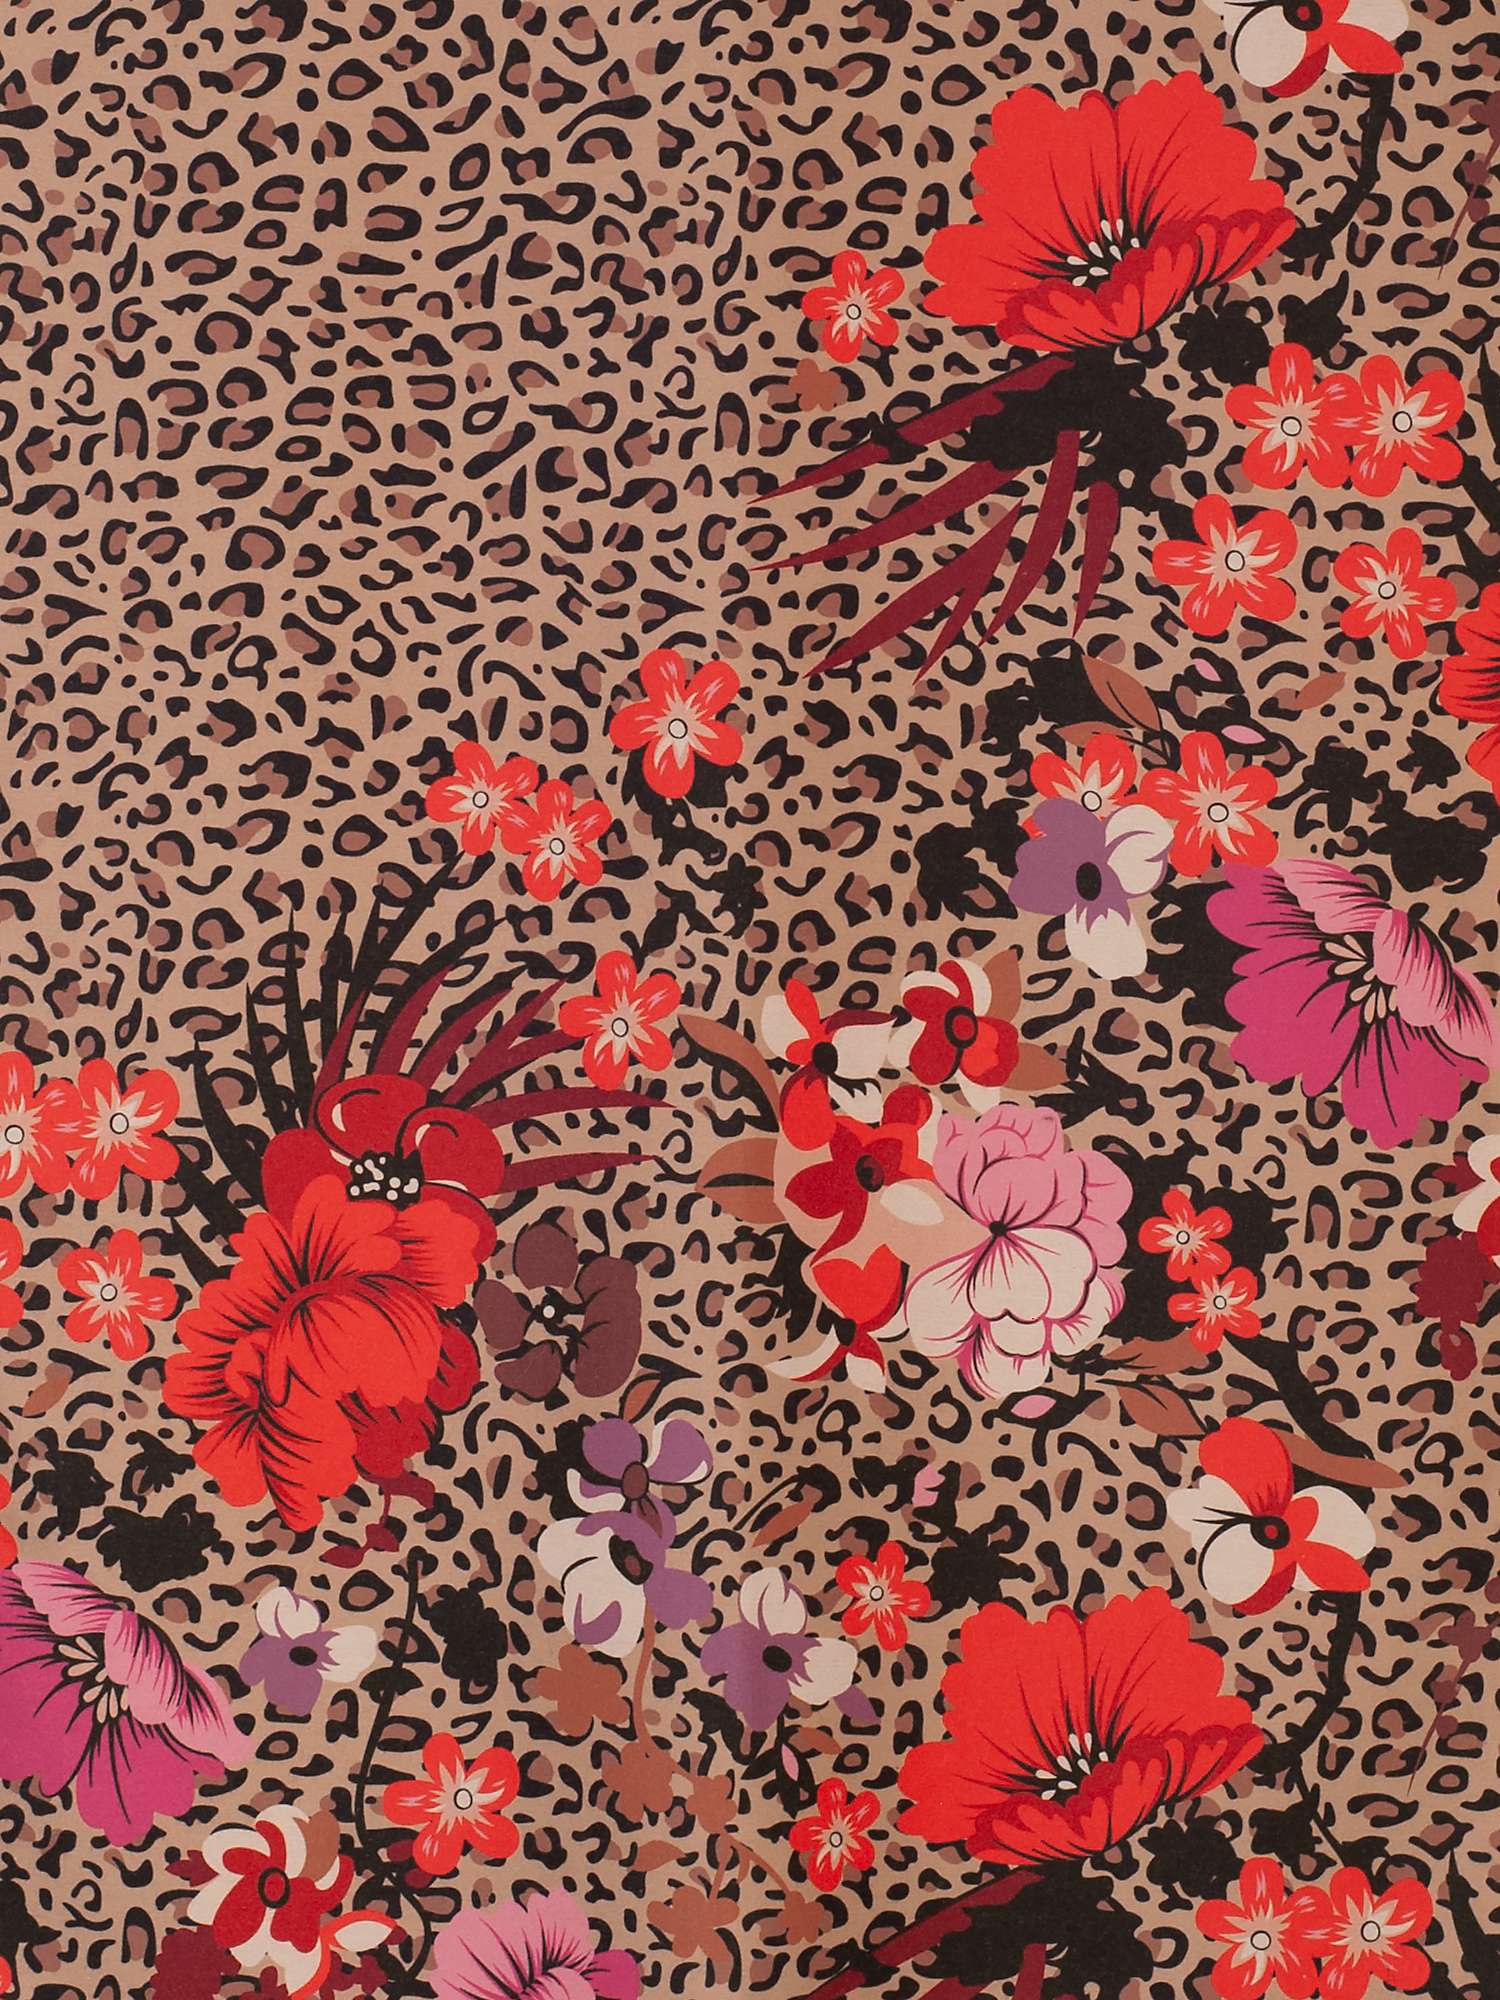 Buy chesca Leopard And Floral Print Scarf, Camel Online at johnlewis.com